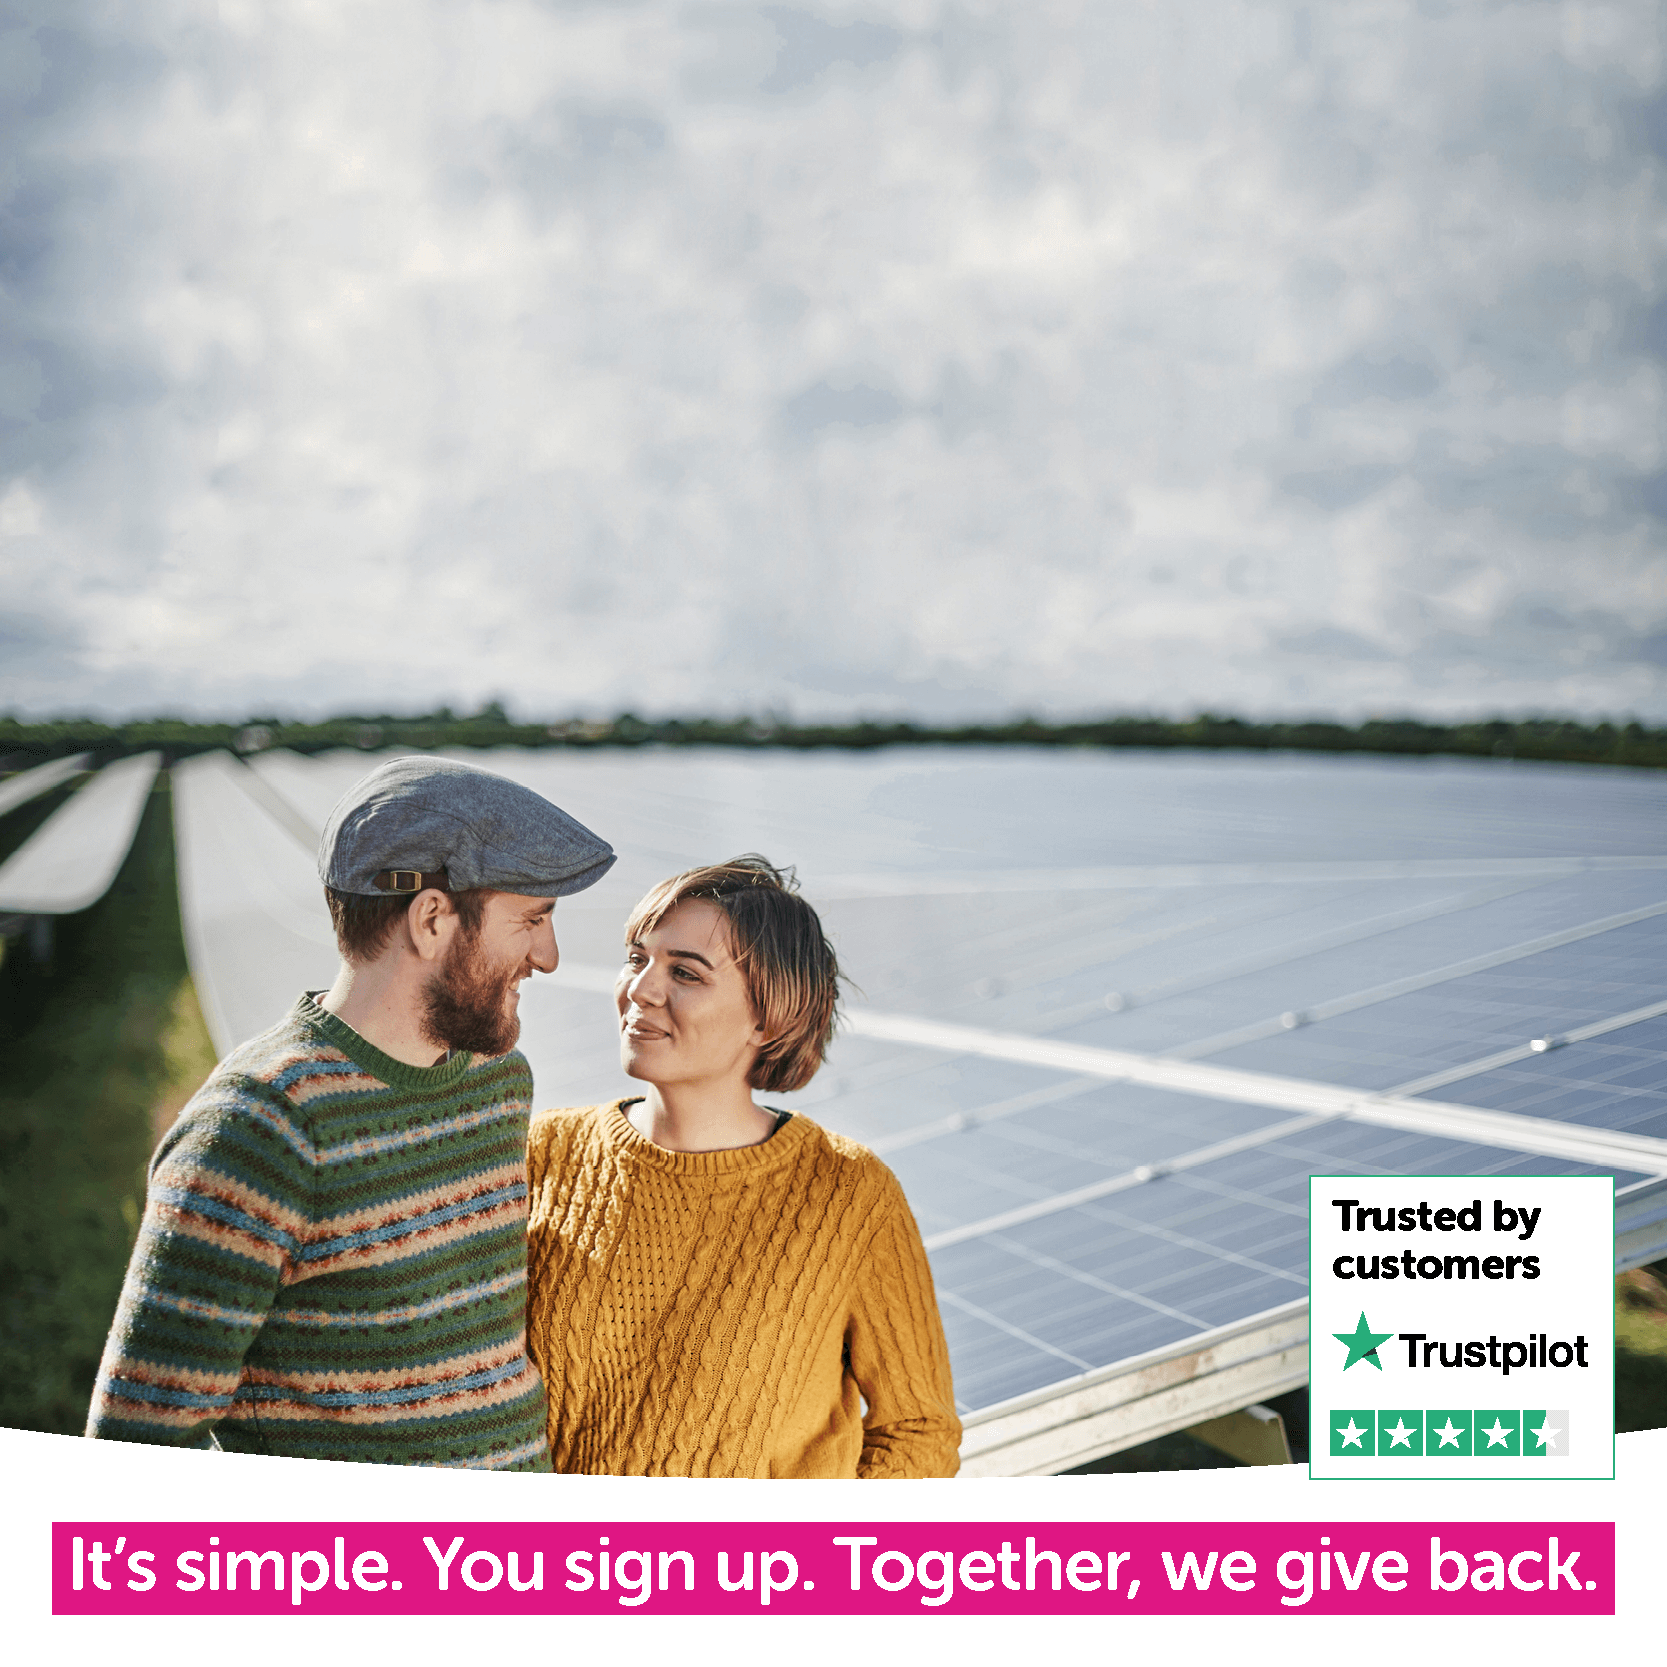 couple stood next to solar panels looking at each other